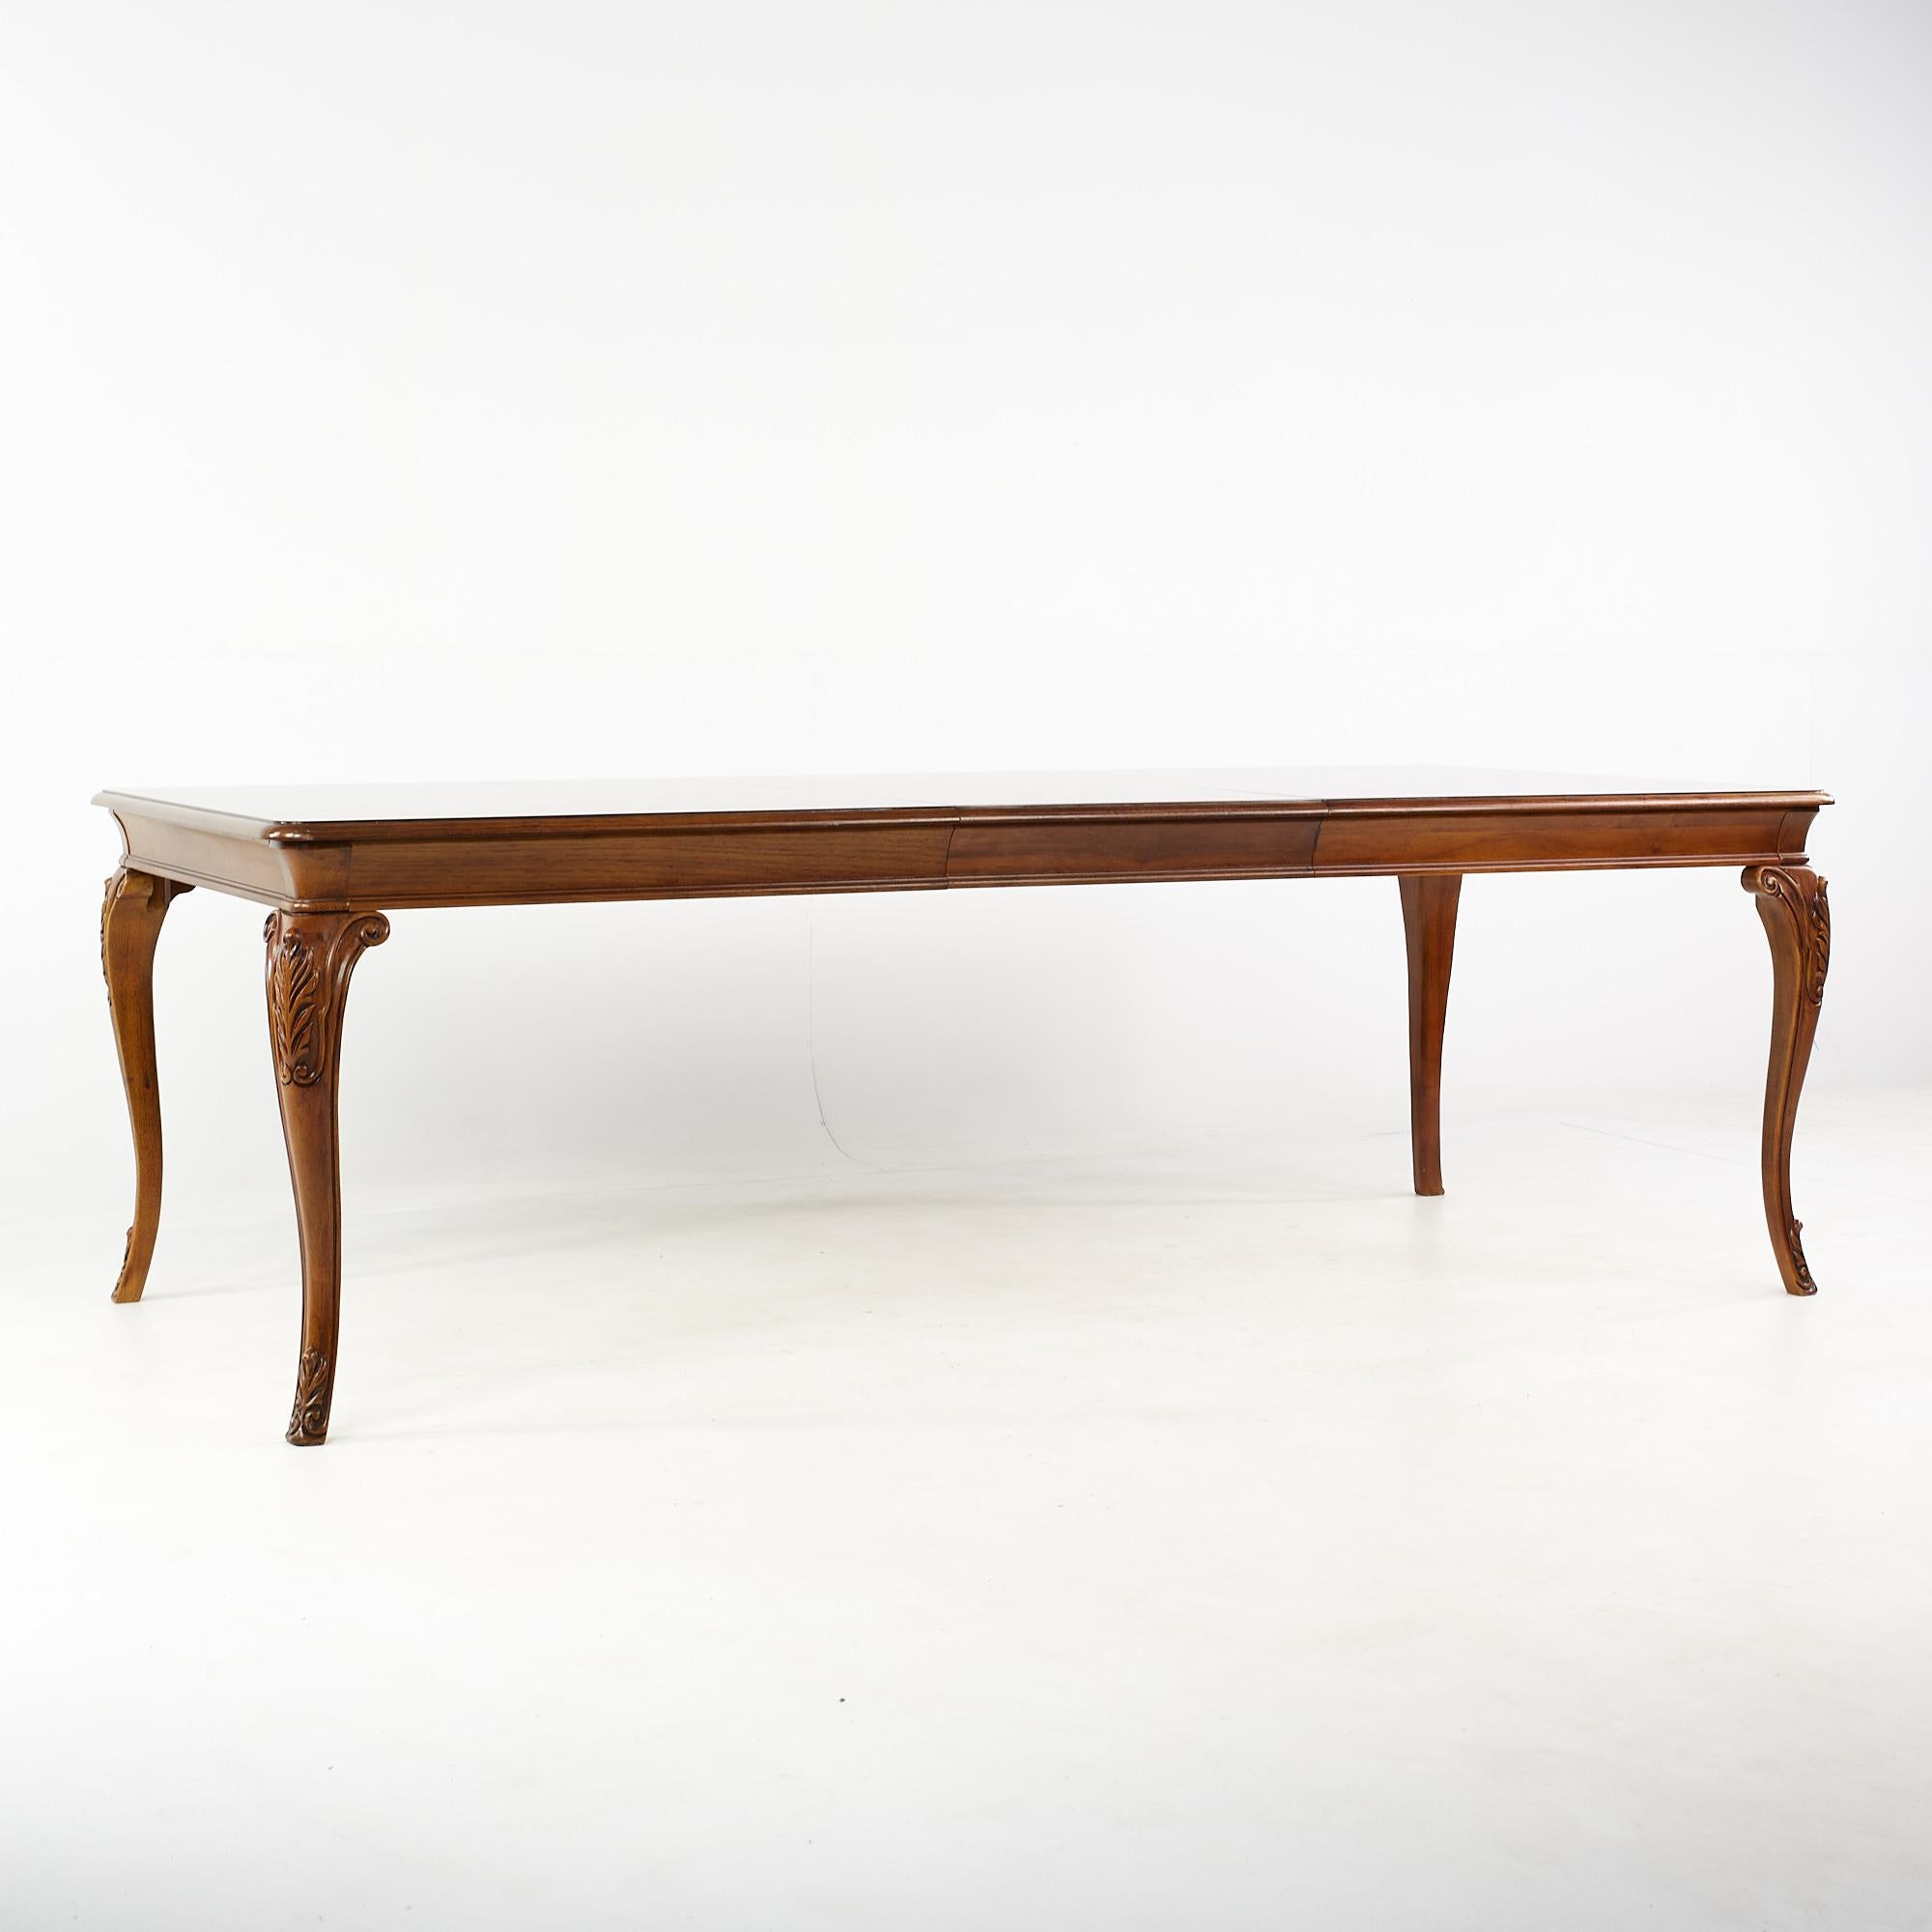 Late 20th Century Thomasville Walnut and Burlwood Expanding Dining Table with 2 Leaves